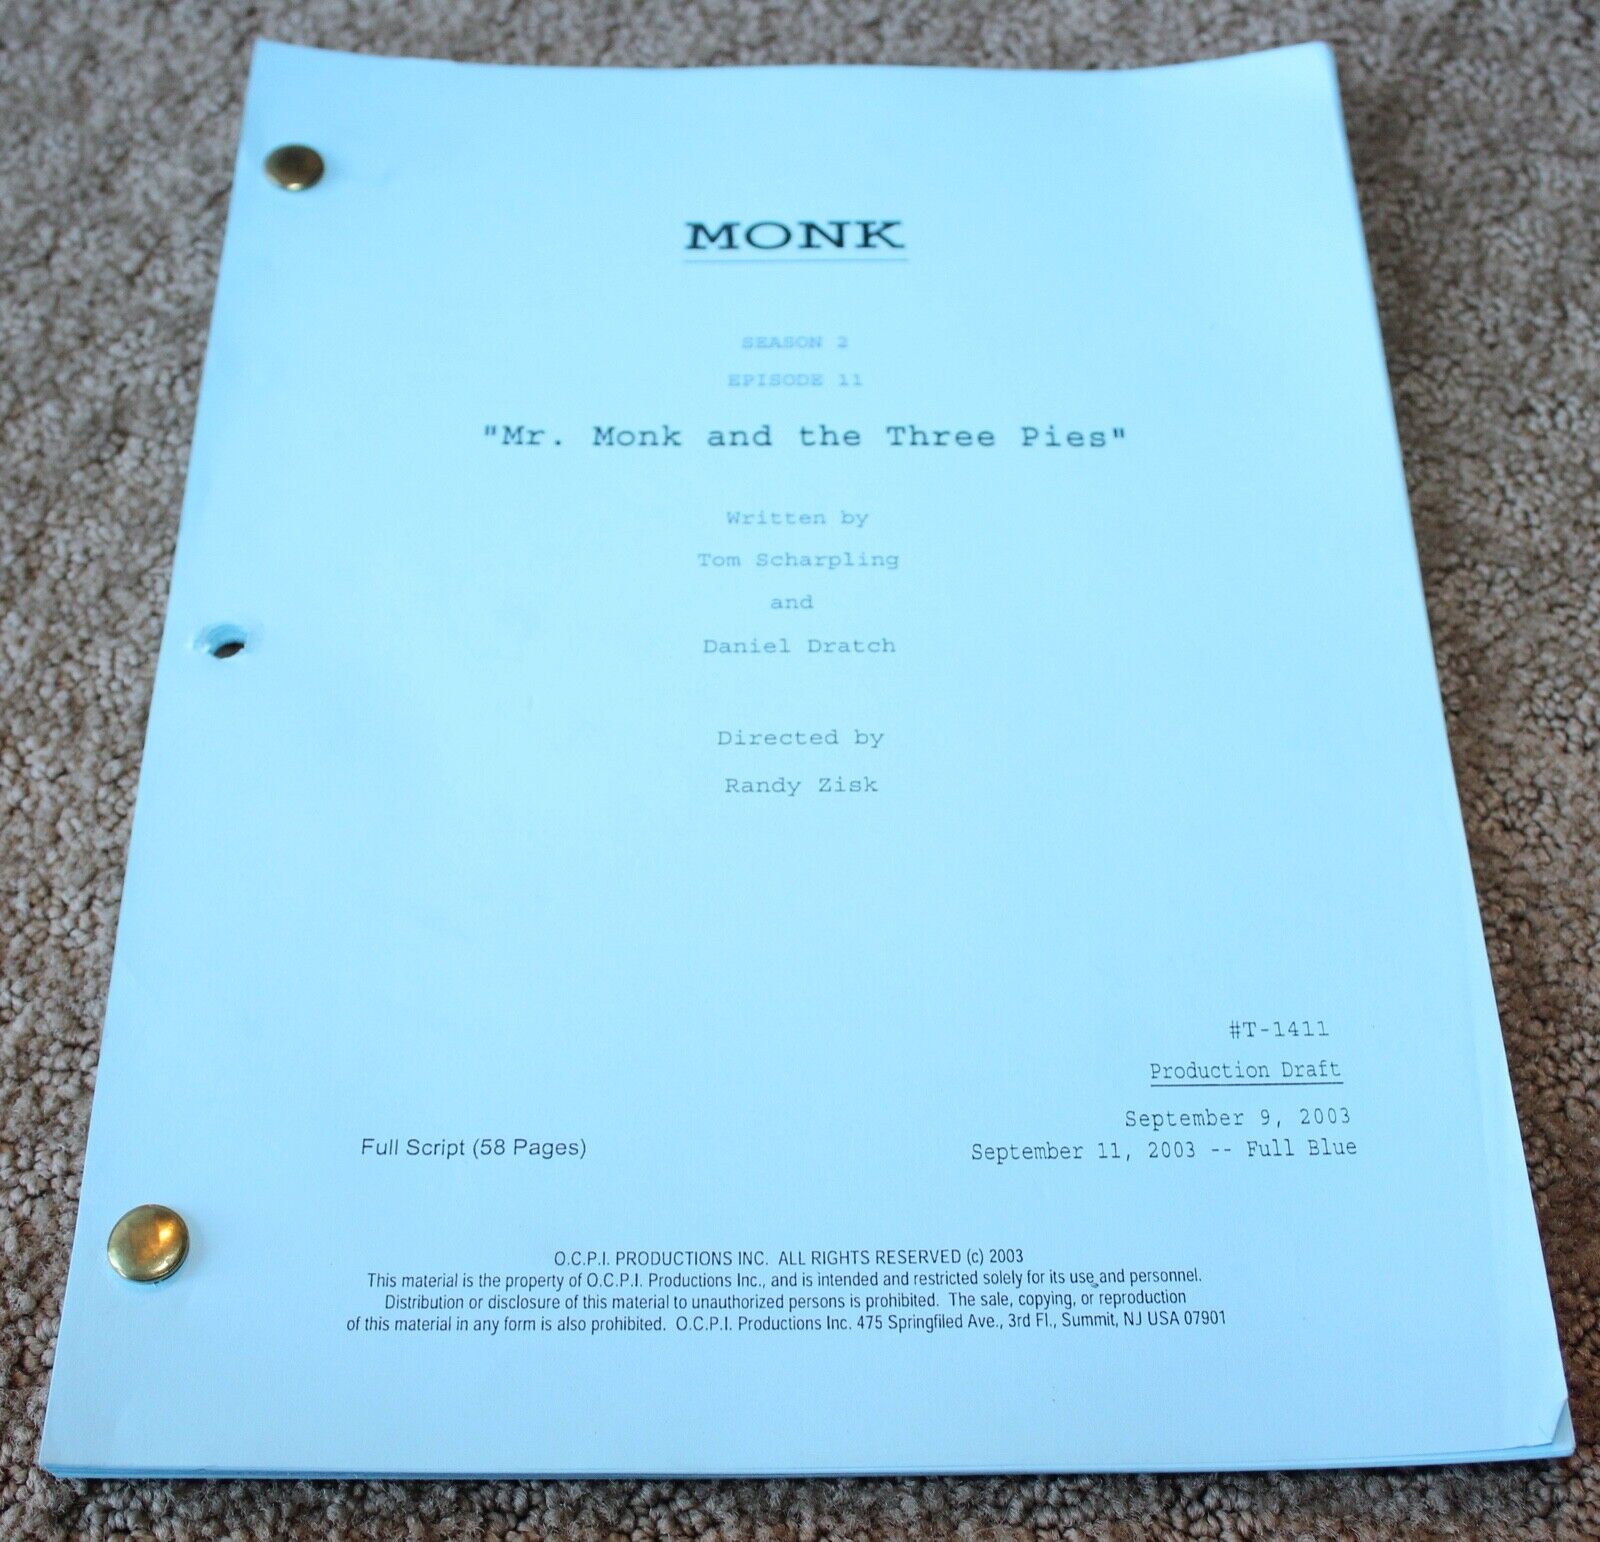 MONK TV SERIES SHOW SCRIPT MR. MONK AND THE THREE PIES